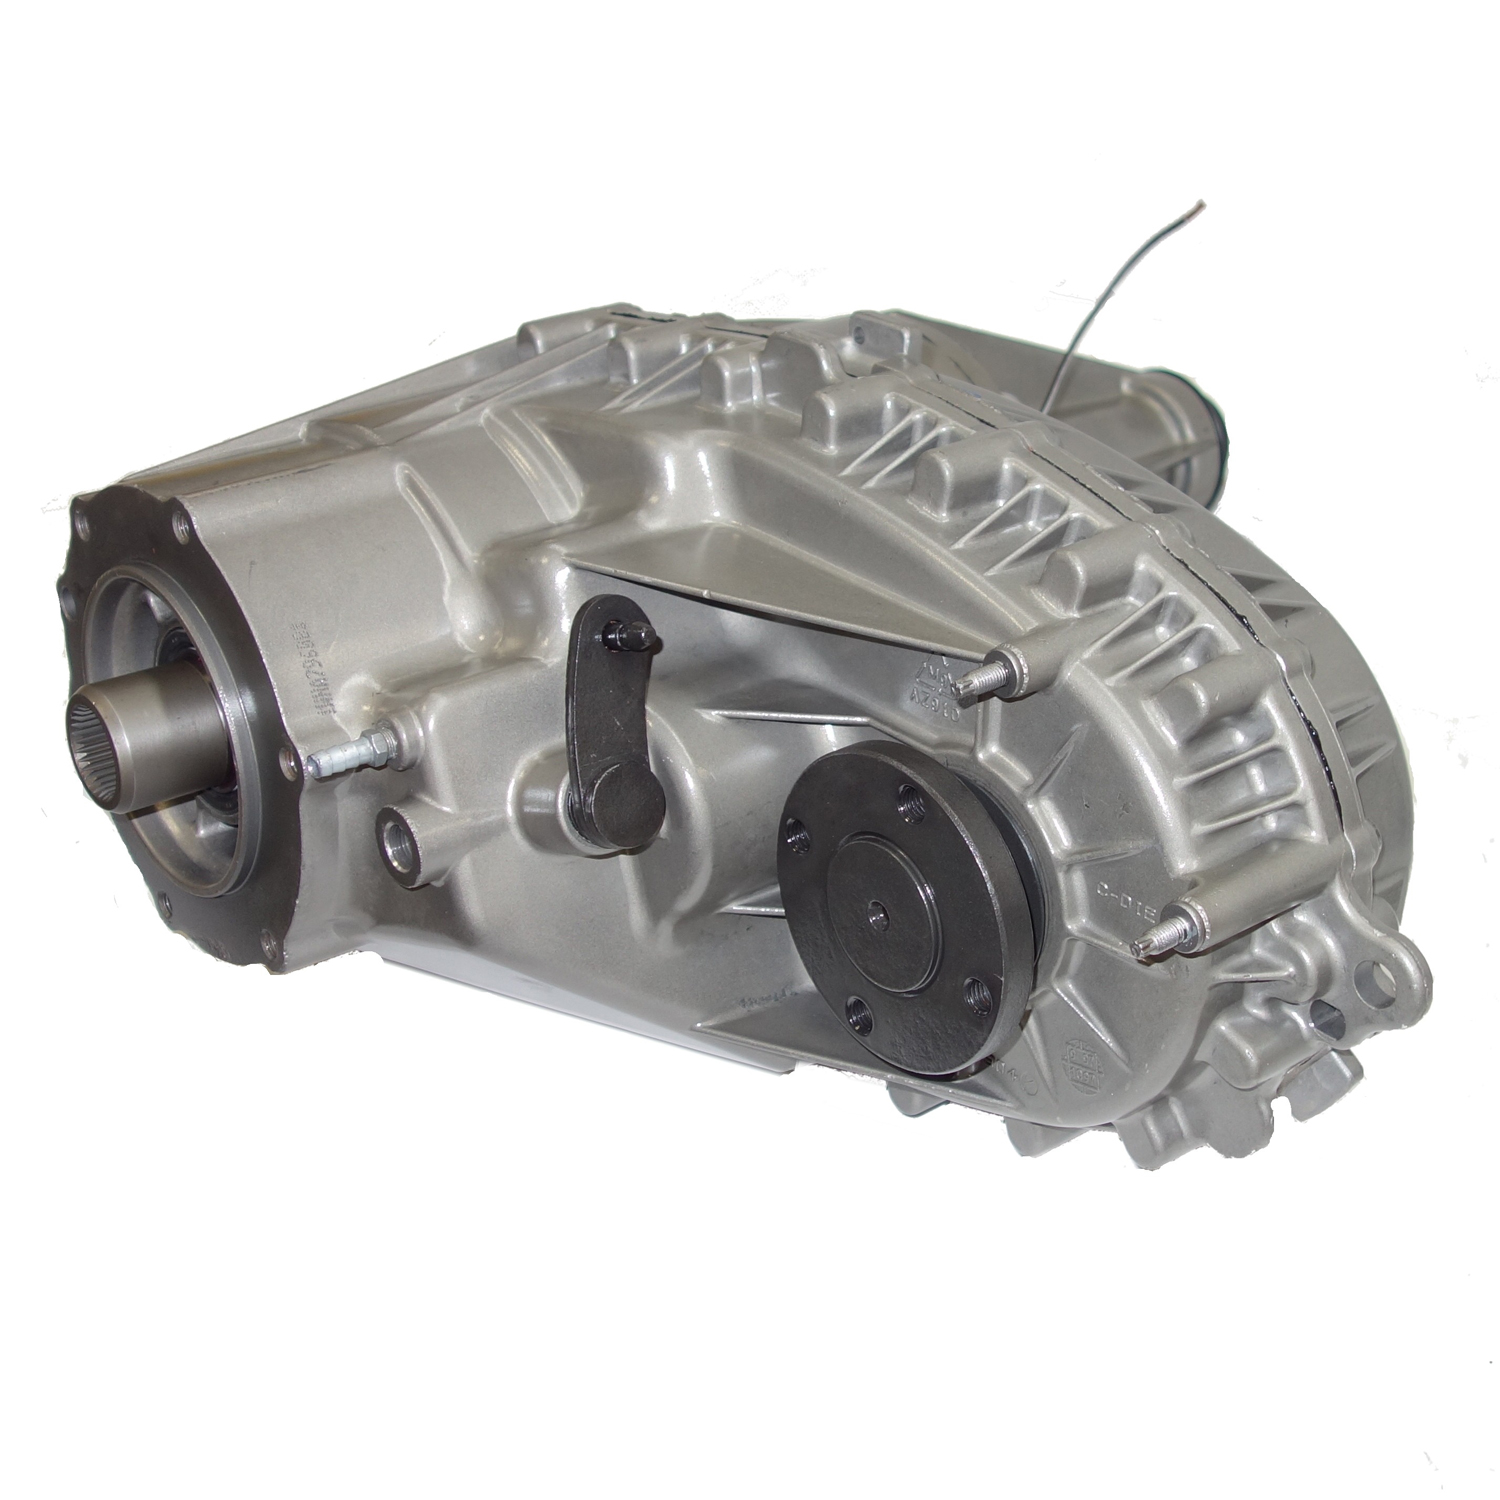 BW4406 Transfer Case for Ford 97-98 F150/F250/Expedition